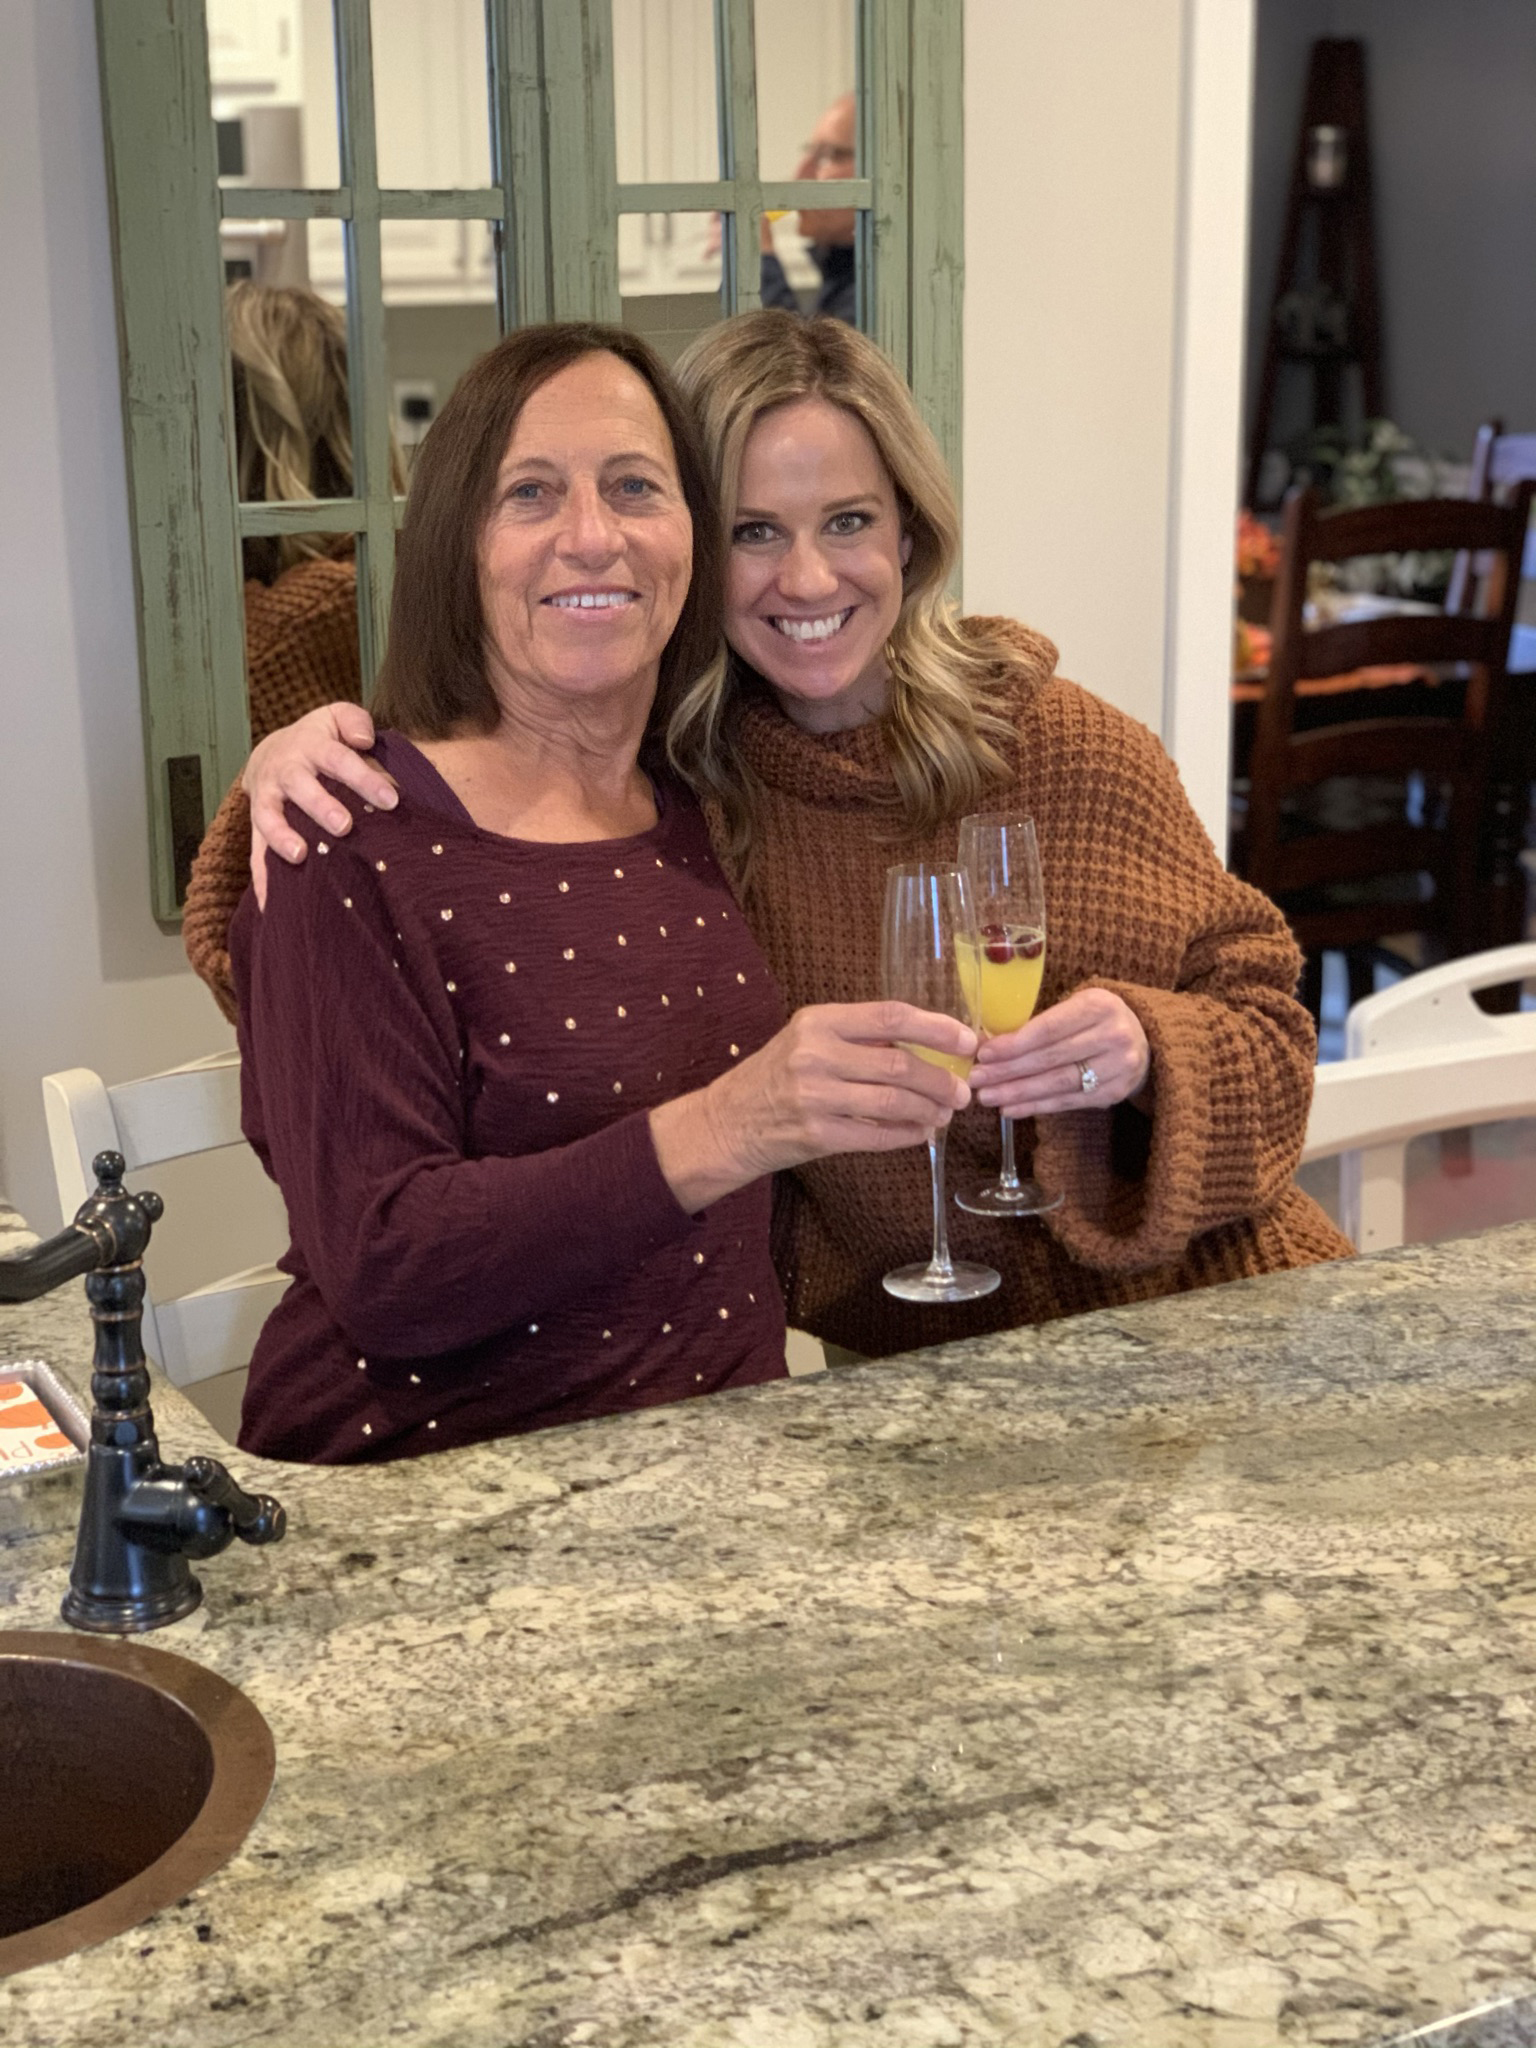 Carol Rosen (left) and her daughter, Lindsay Murray (right), stand in their home. They each hold a champagne-sized glass and cheers.